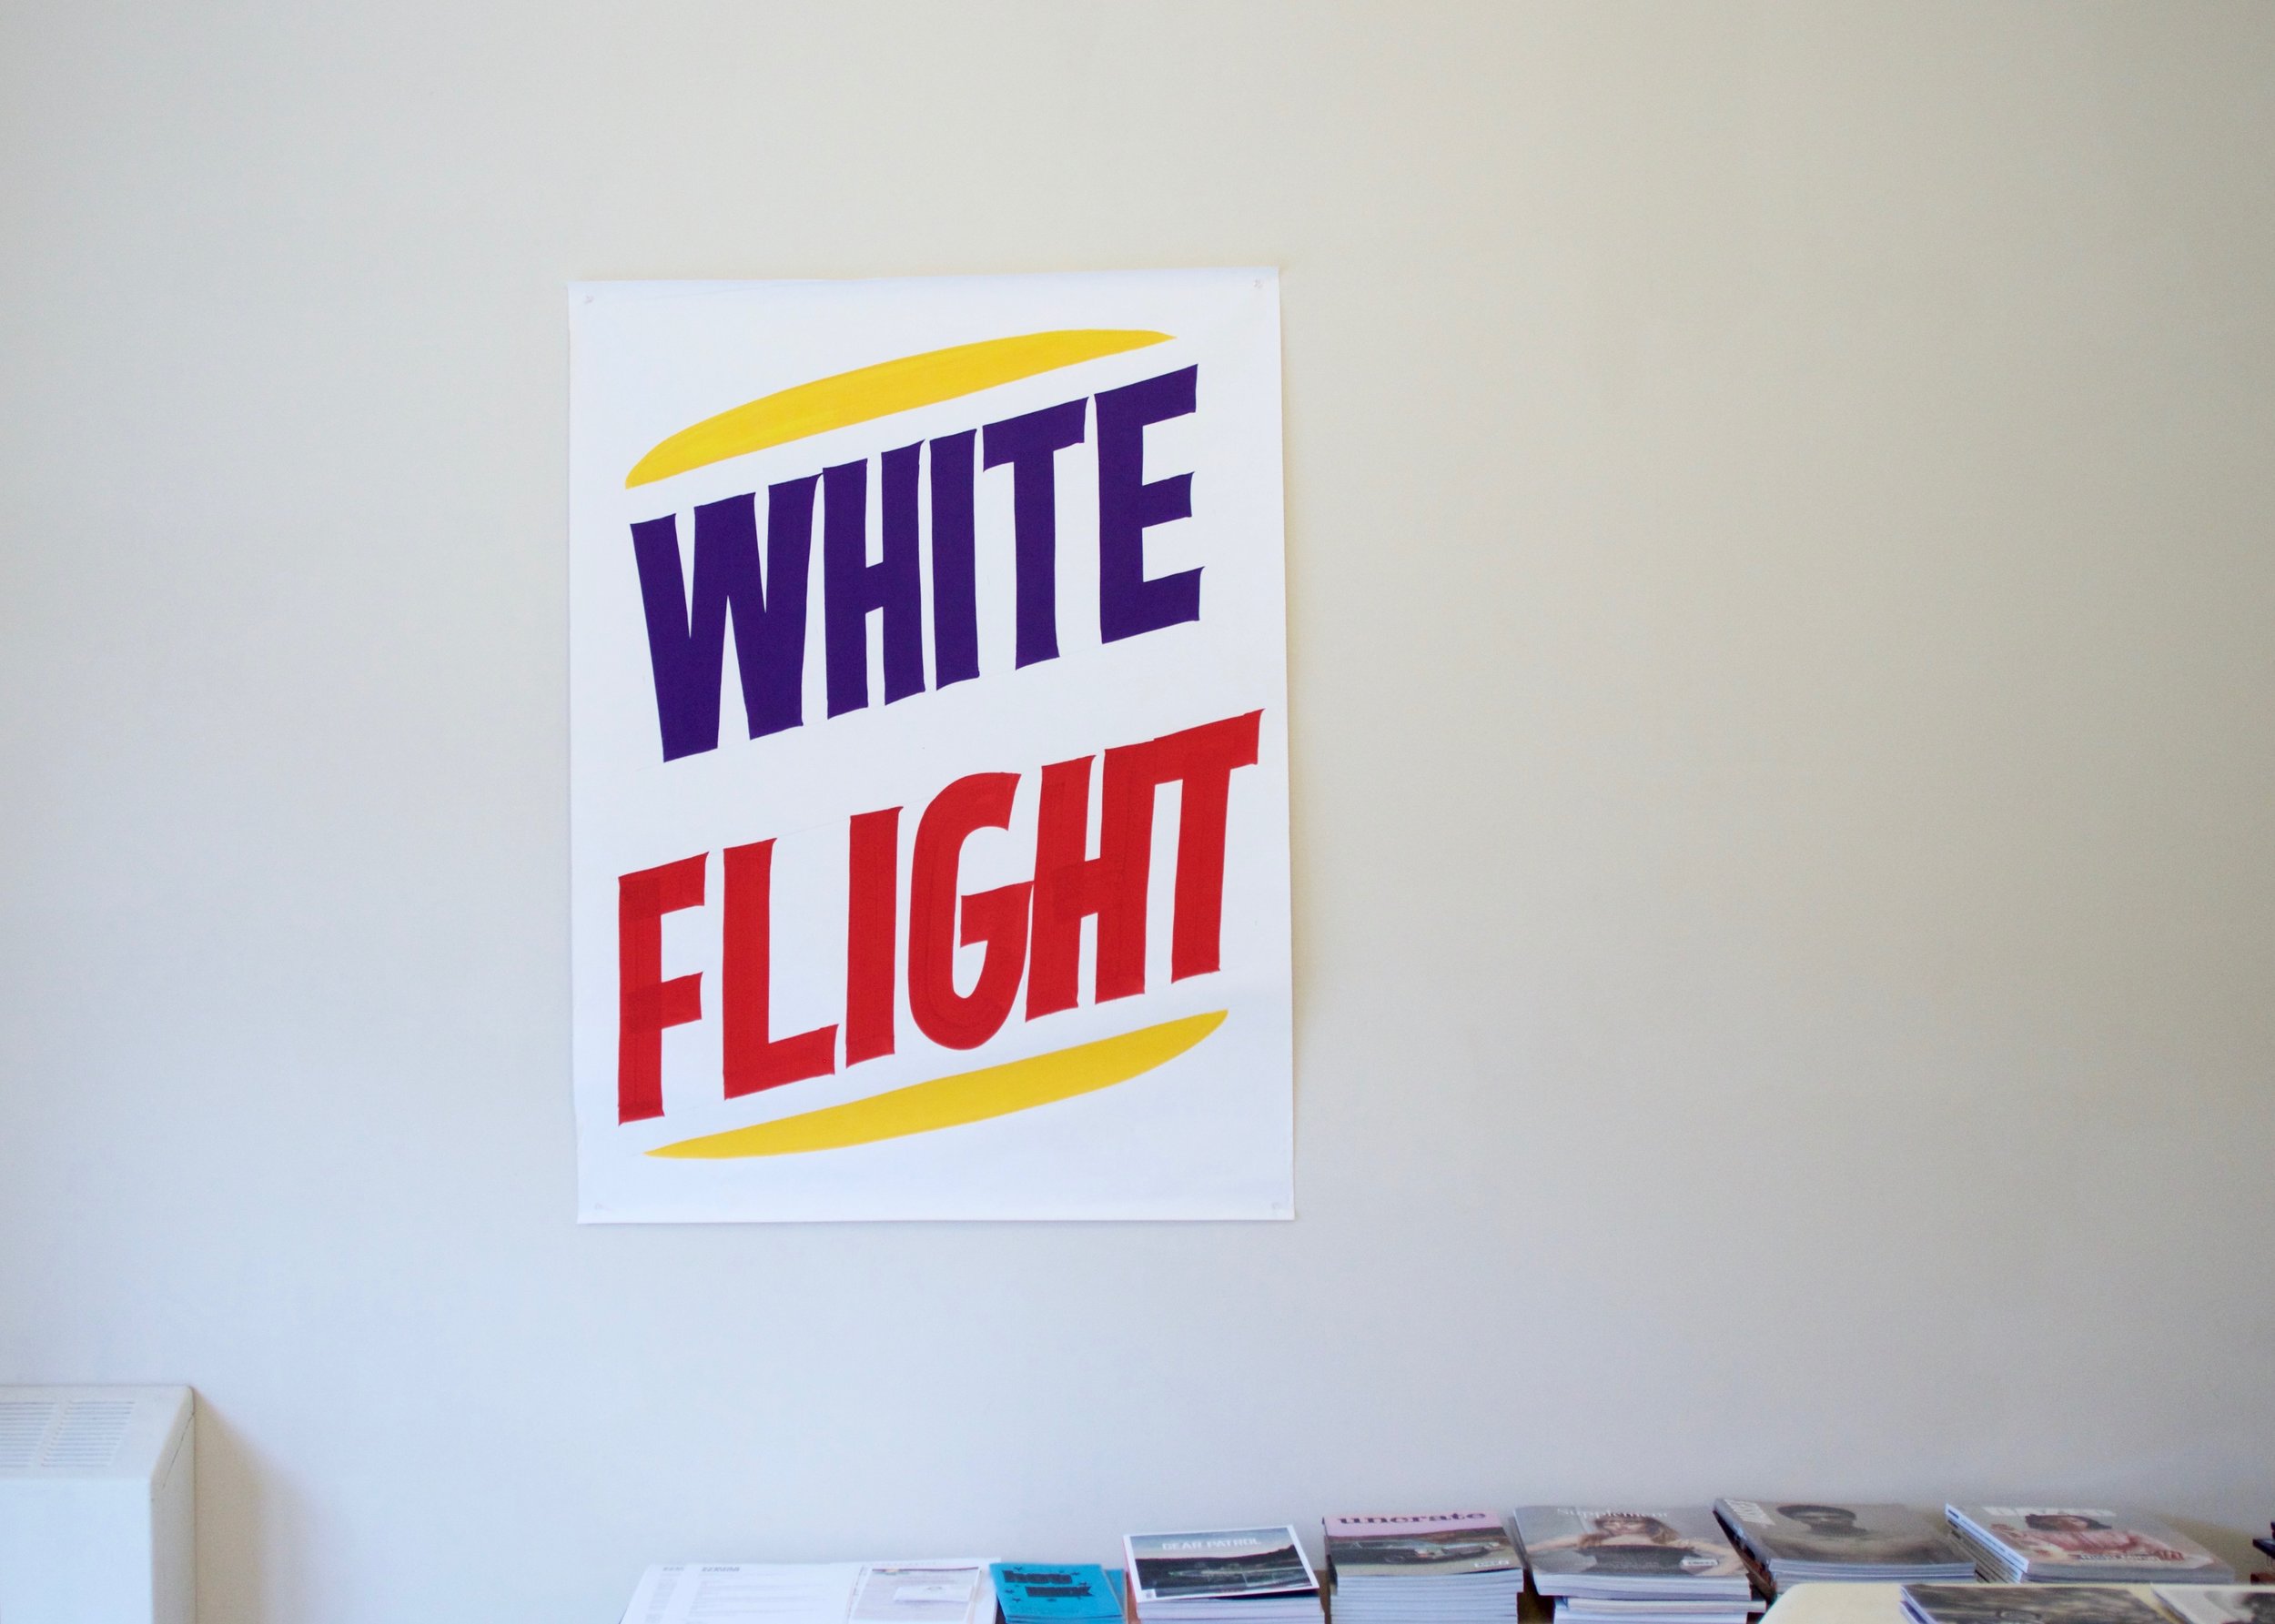   White Flight , hand painted sign, 2012 